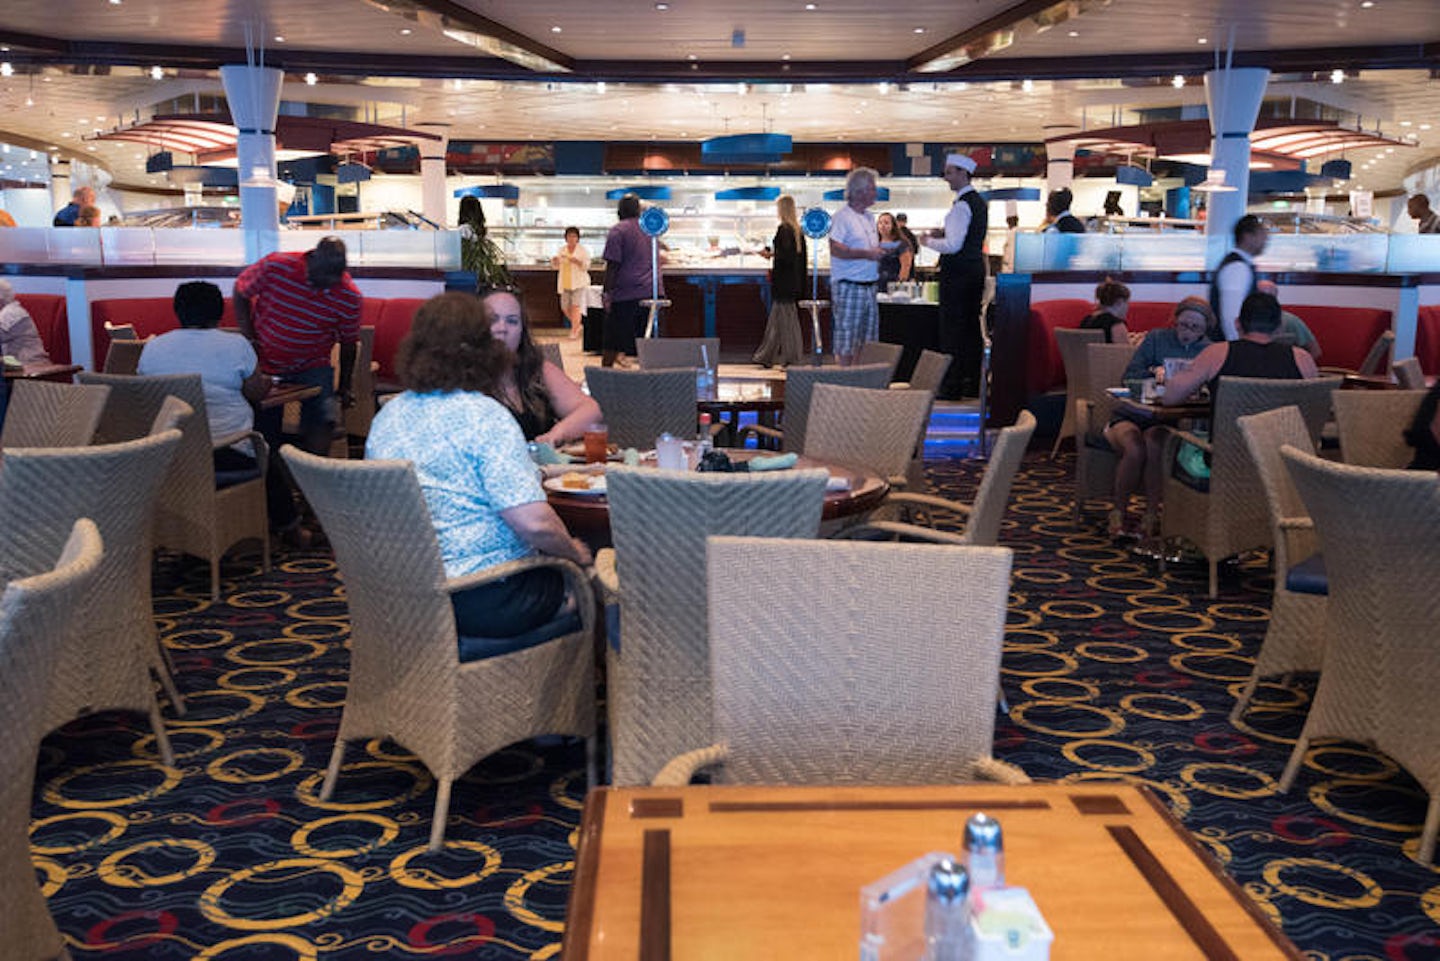 Windjammer Cafe on Freedom of the Seas